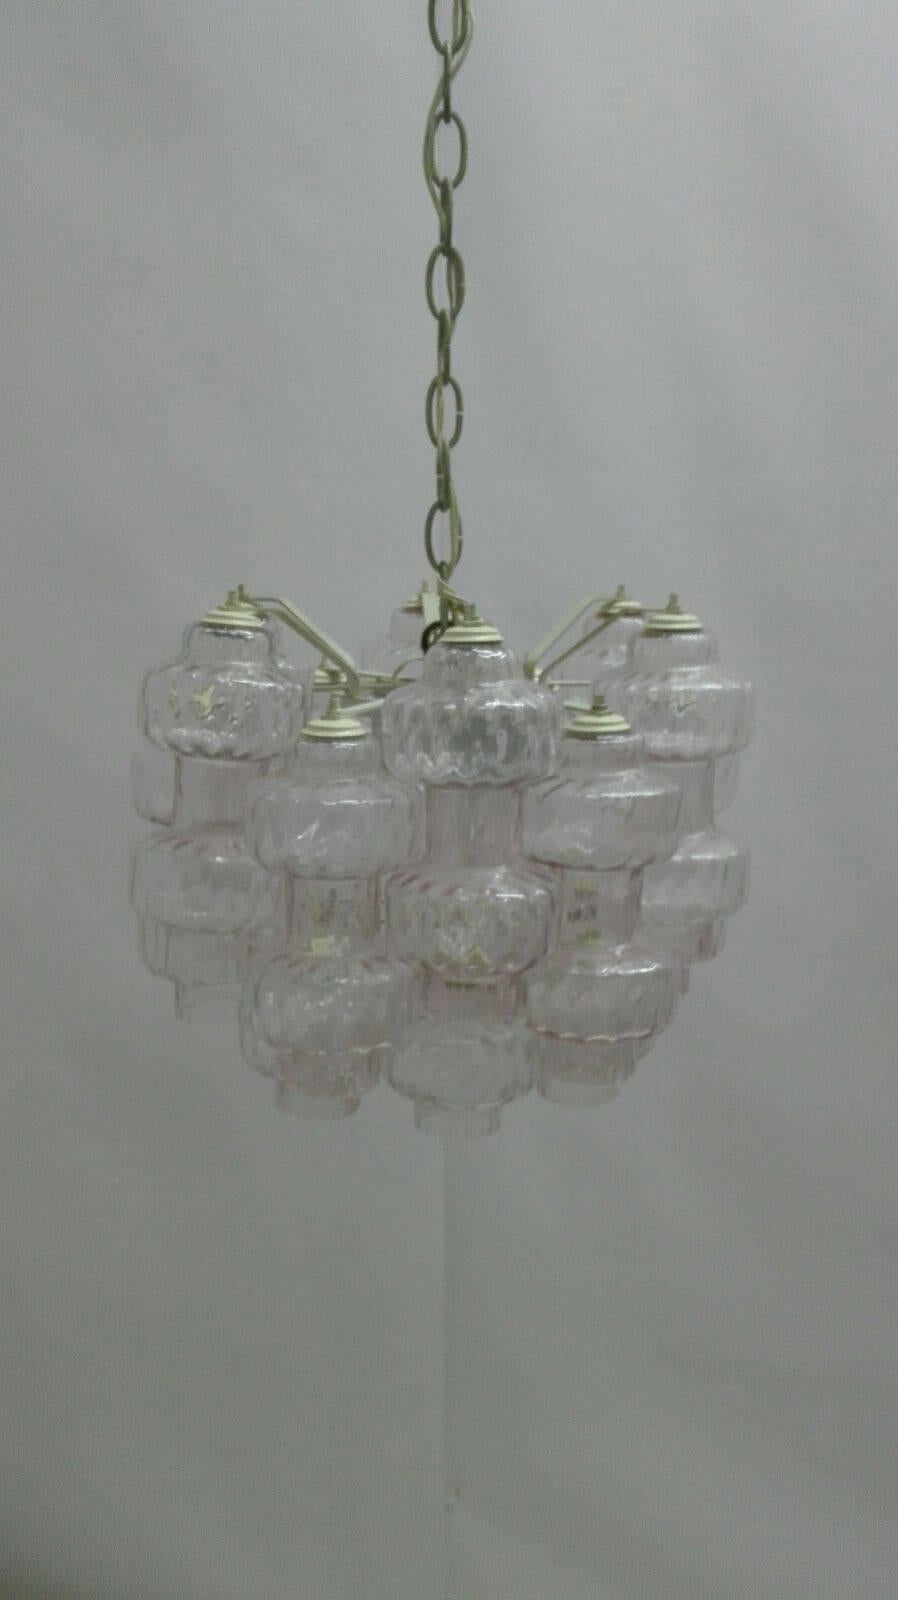 Seguso chandelier. This large Murano glass chandelier, Italian art has been designed and made by Seguso in 1960, versatile speaker in Murano glass.